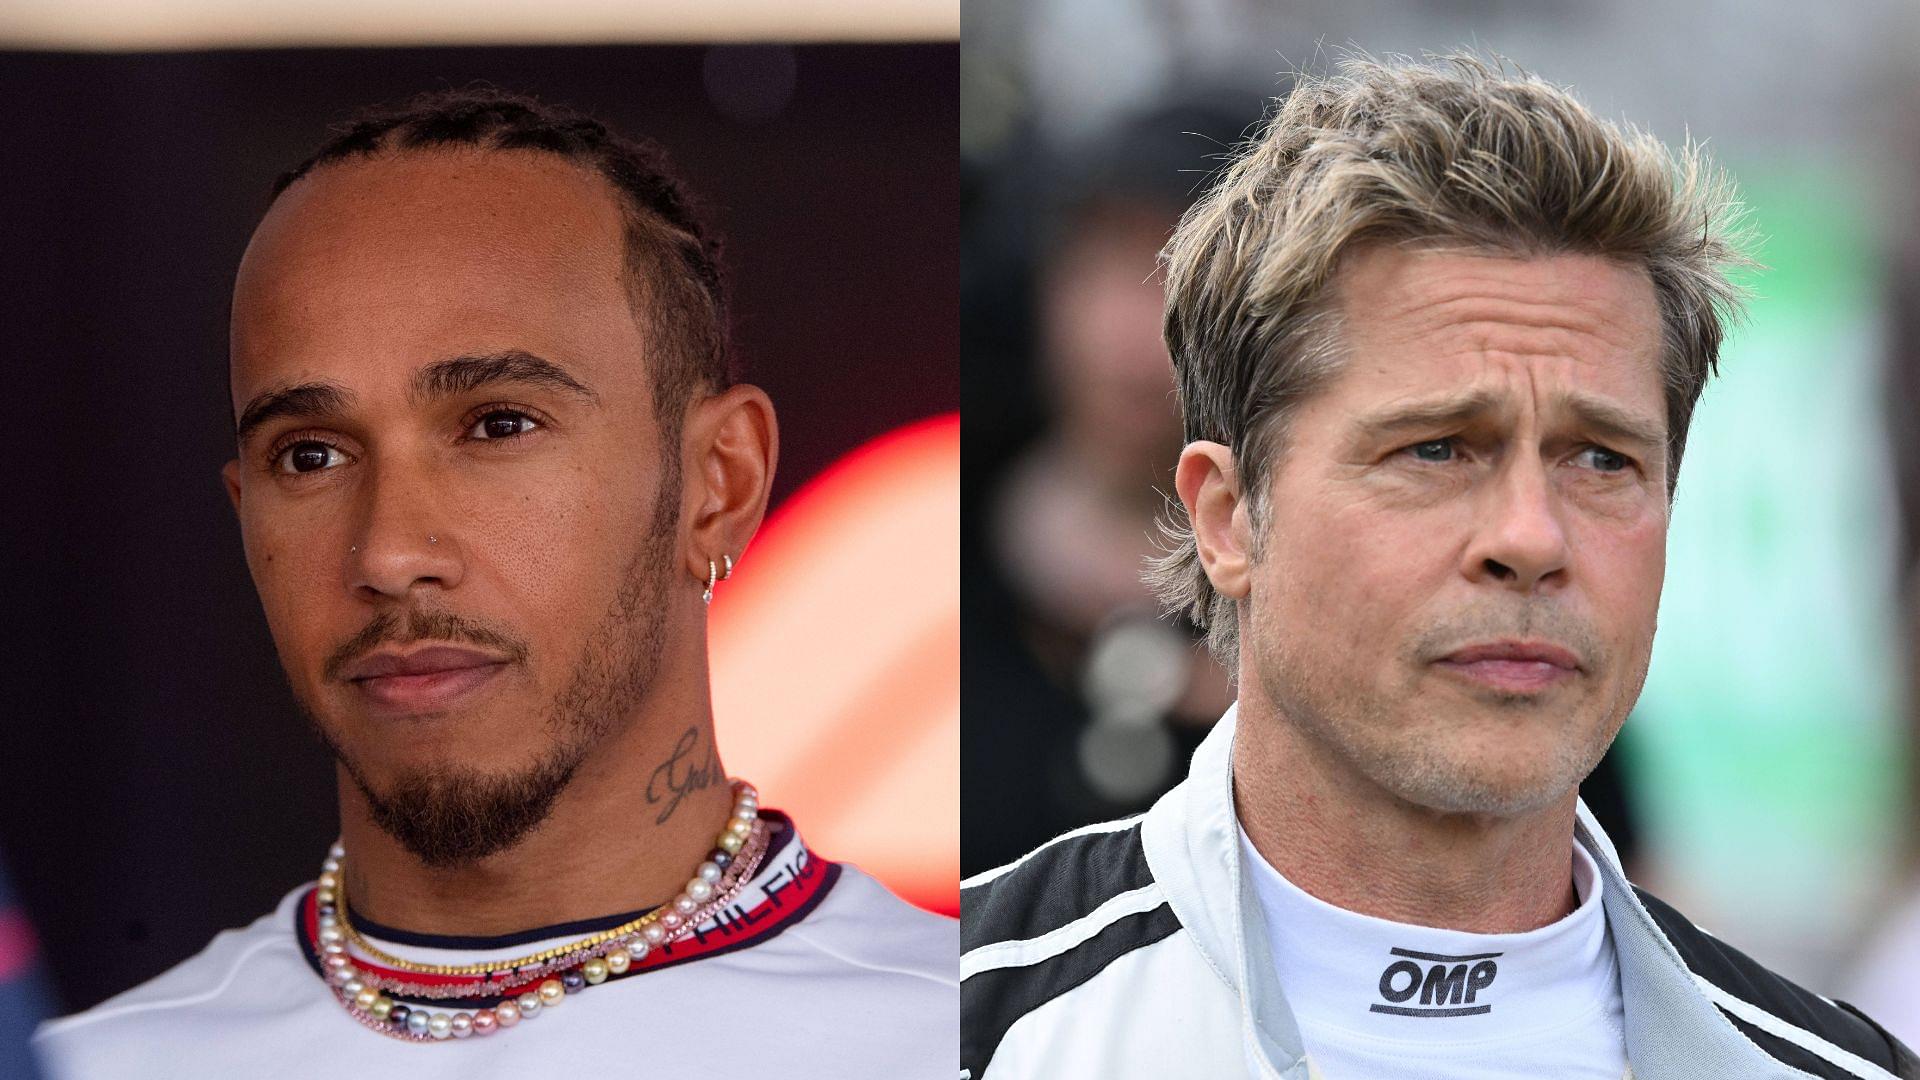 Lewis Hamilton and Brad Pitt's Great Hollywood Collaboration Shaken Up and Delayed With Major Concerns